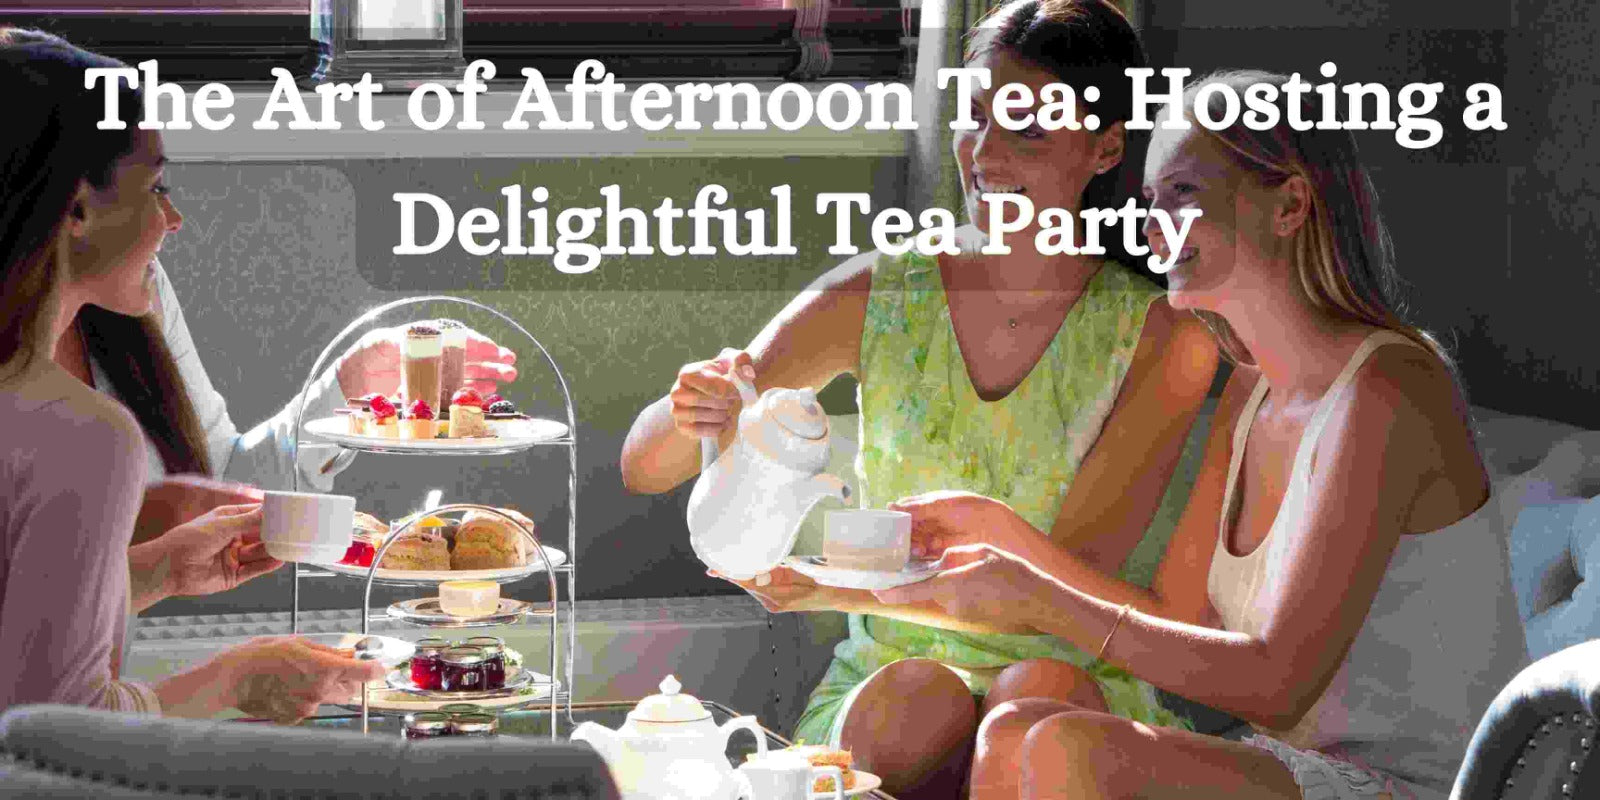 The Art of Afternoon Tea: Hosting a Delightful Tea Party